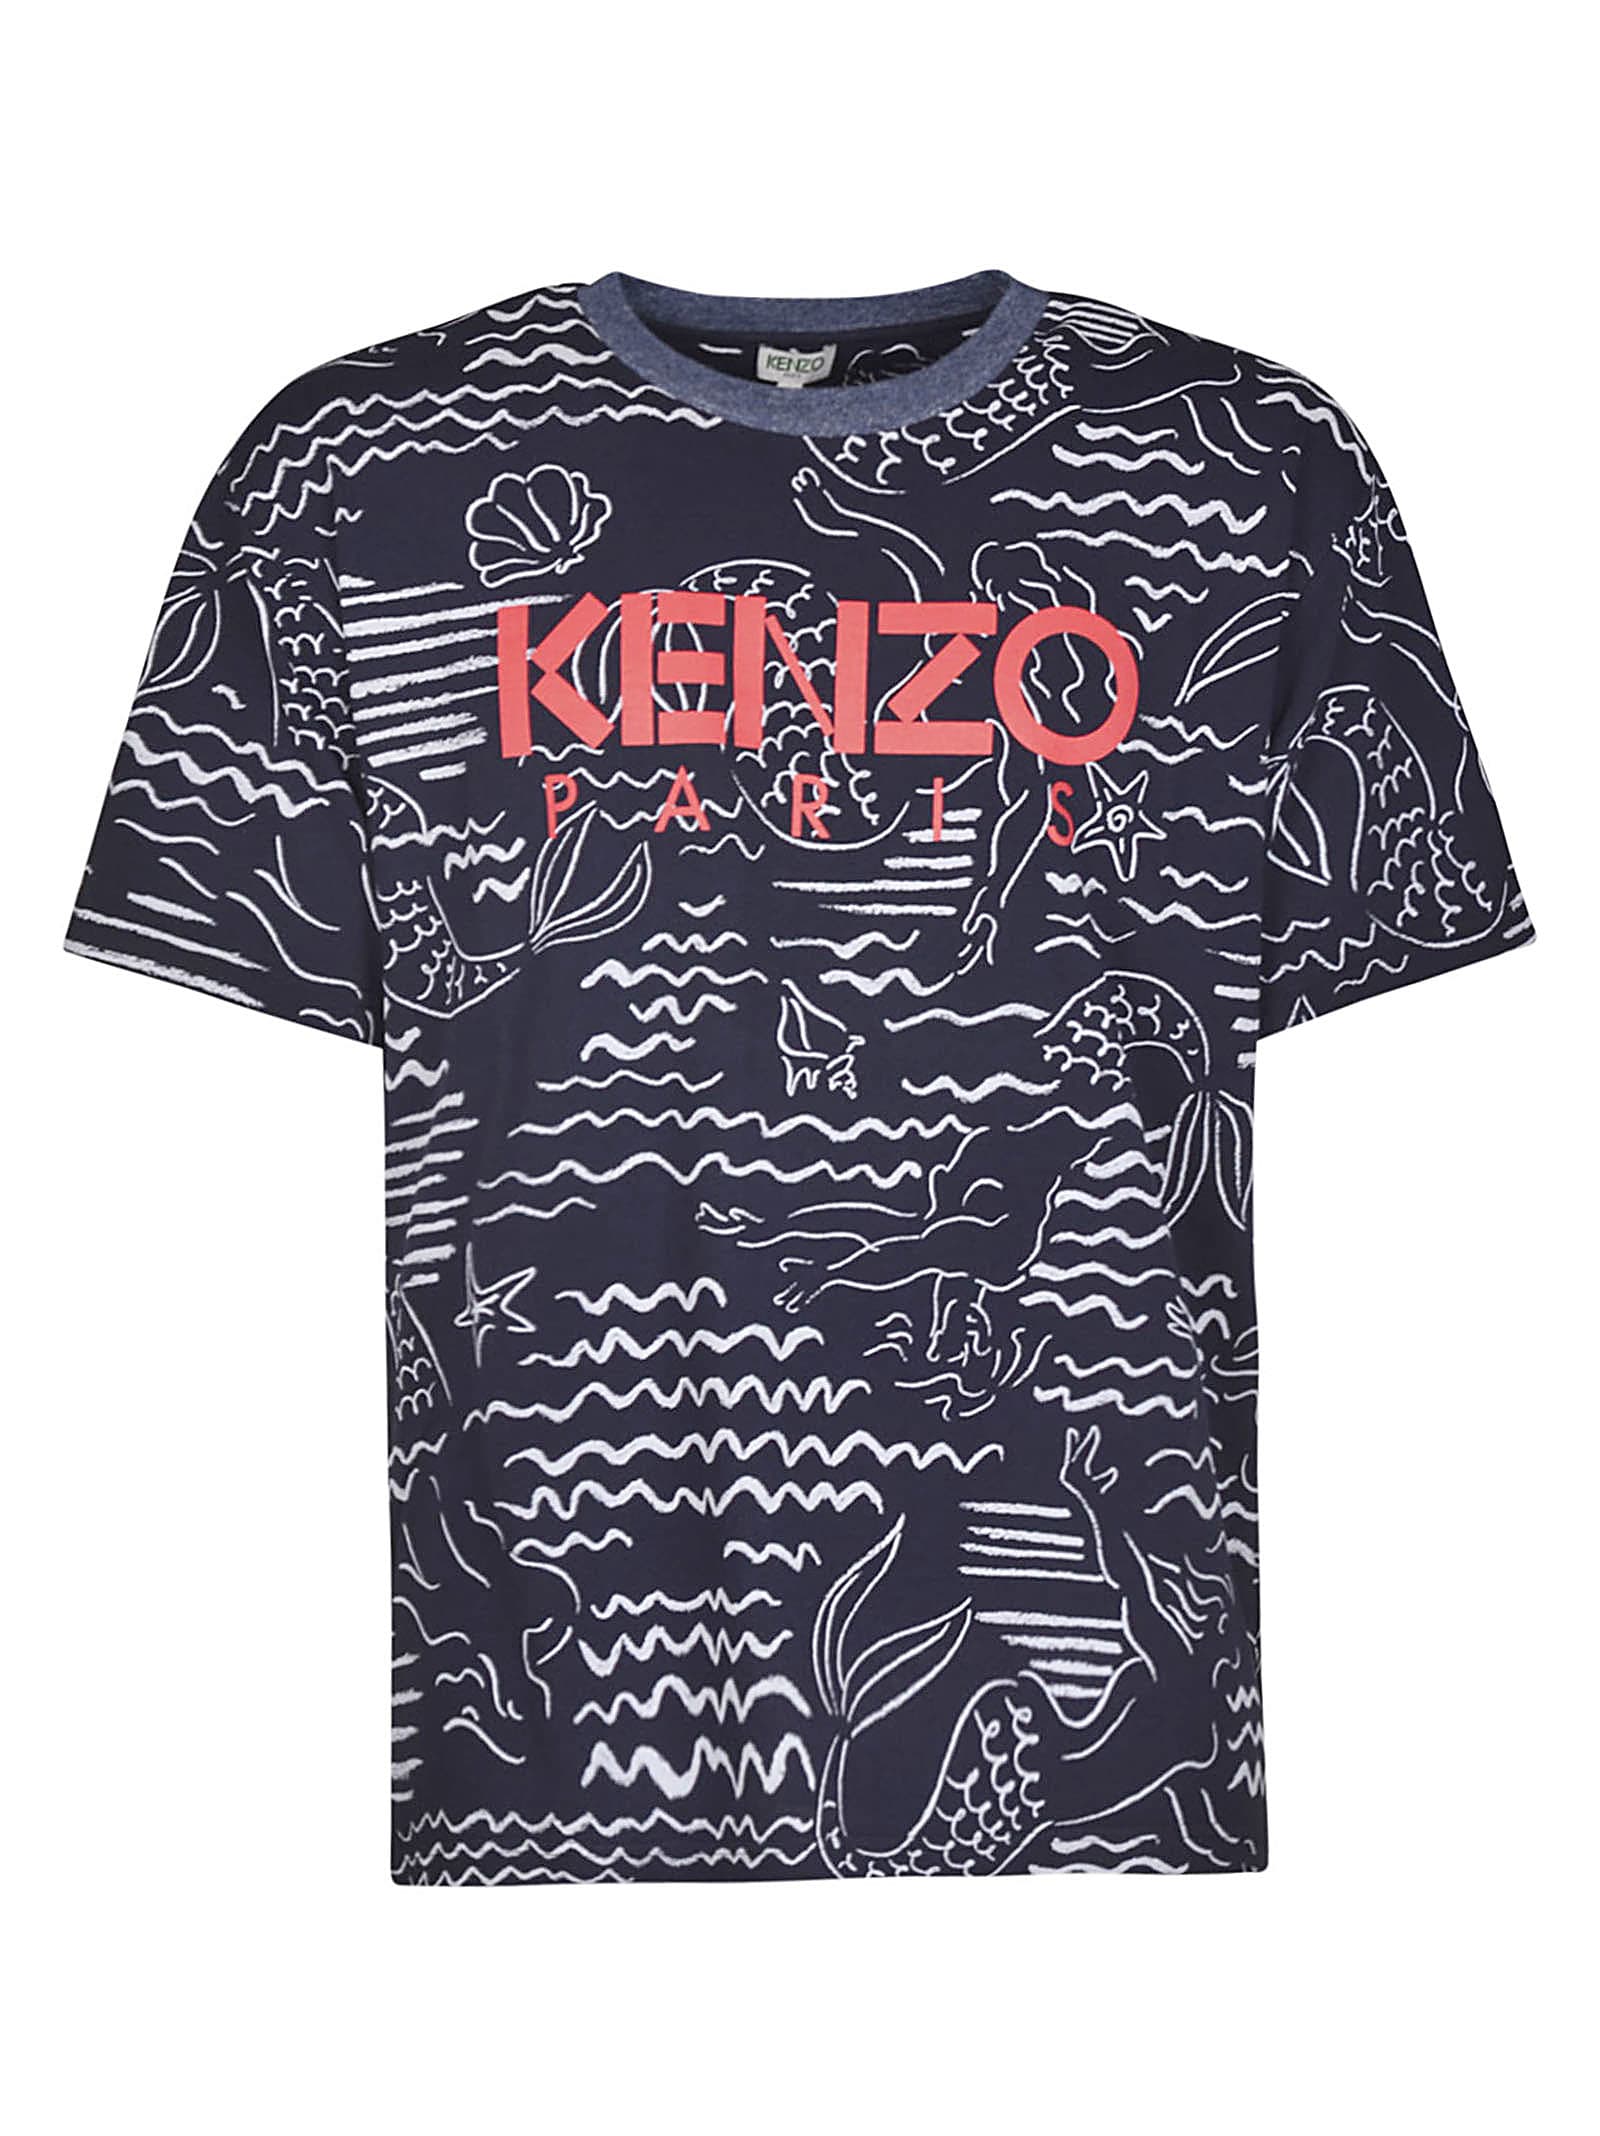 KENZO ALL-OVER PRINTED T-SHIRT,11224204